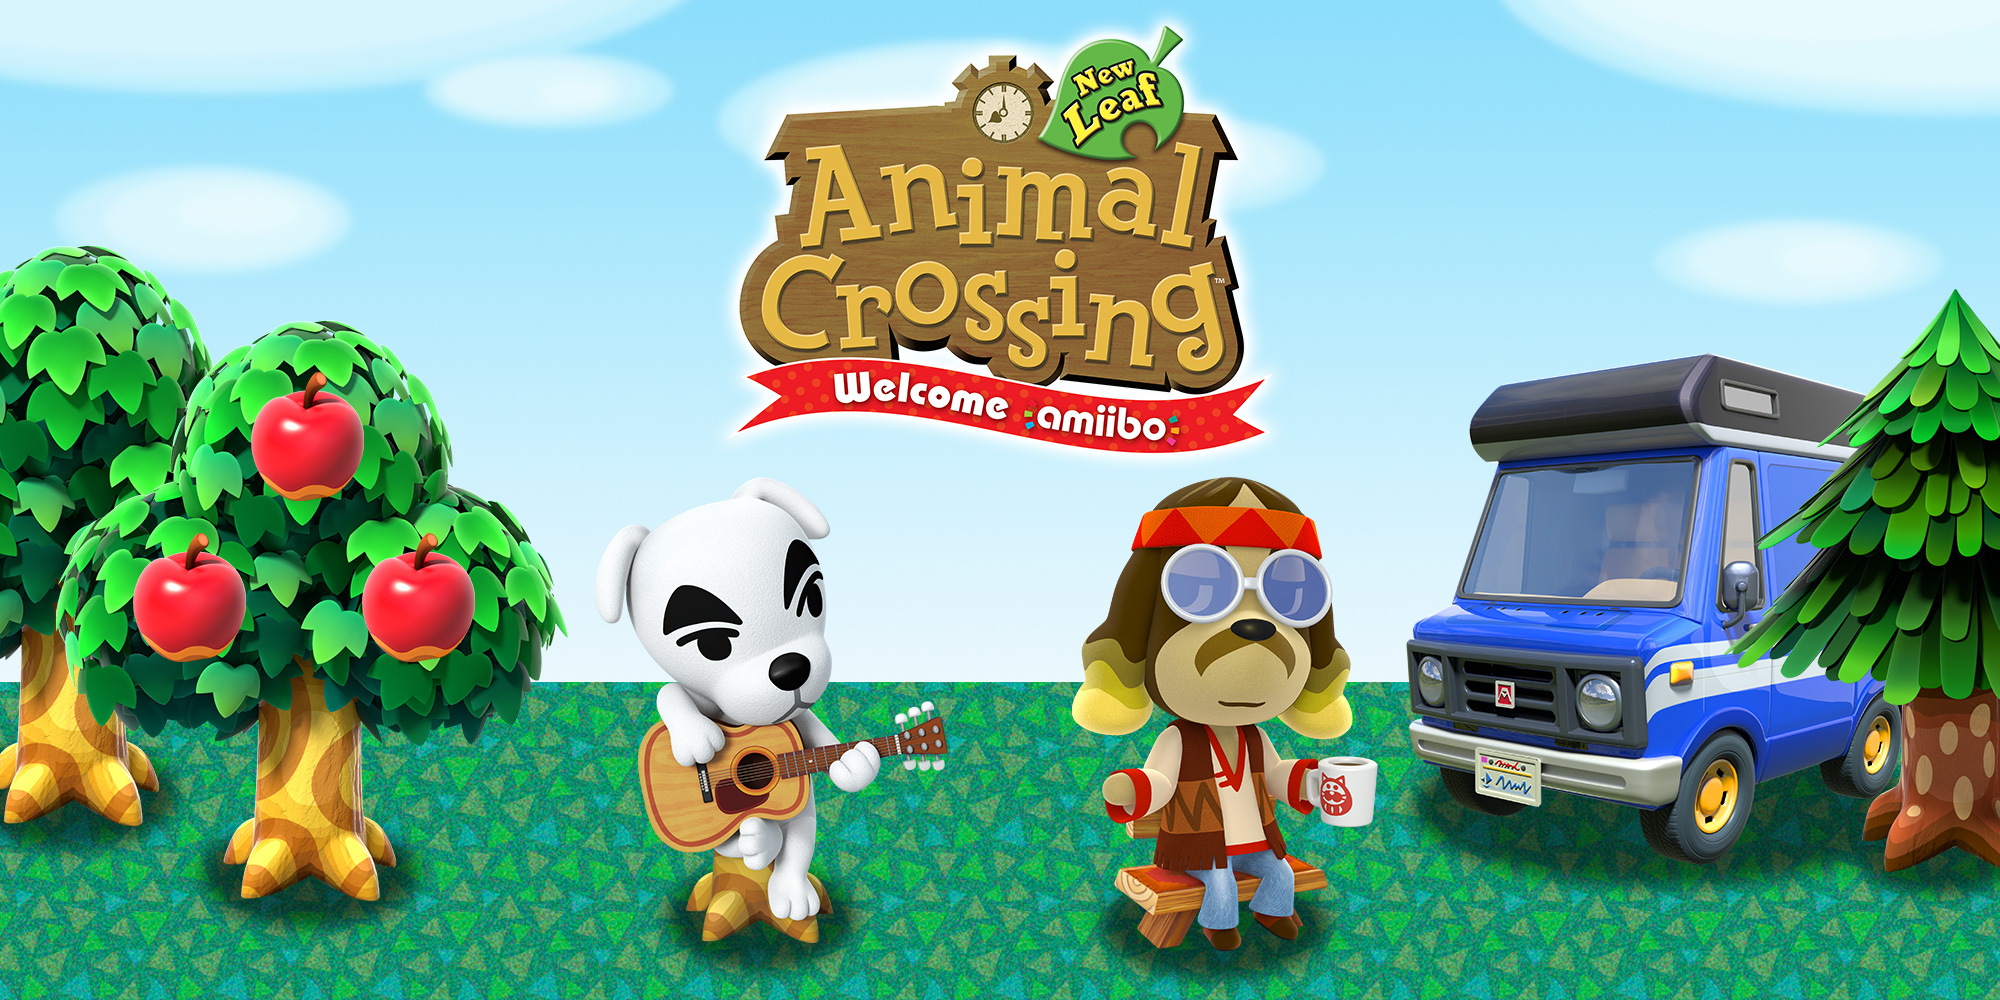 oase nederlag For nylig What's hot in the free Animal Crossing: New Leaf update? Hear it straight  from the developers in our interview! | News | Nintendo